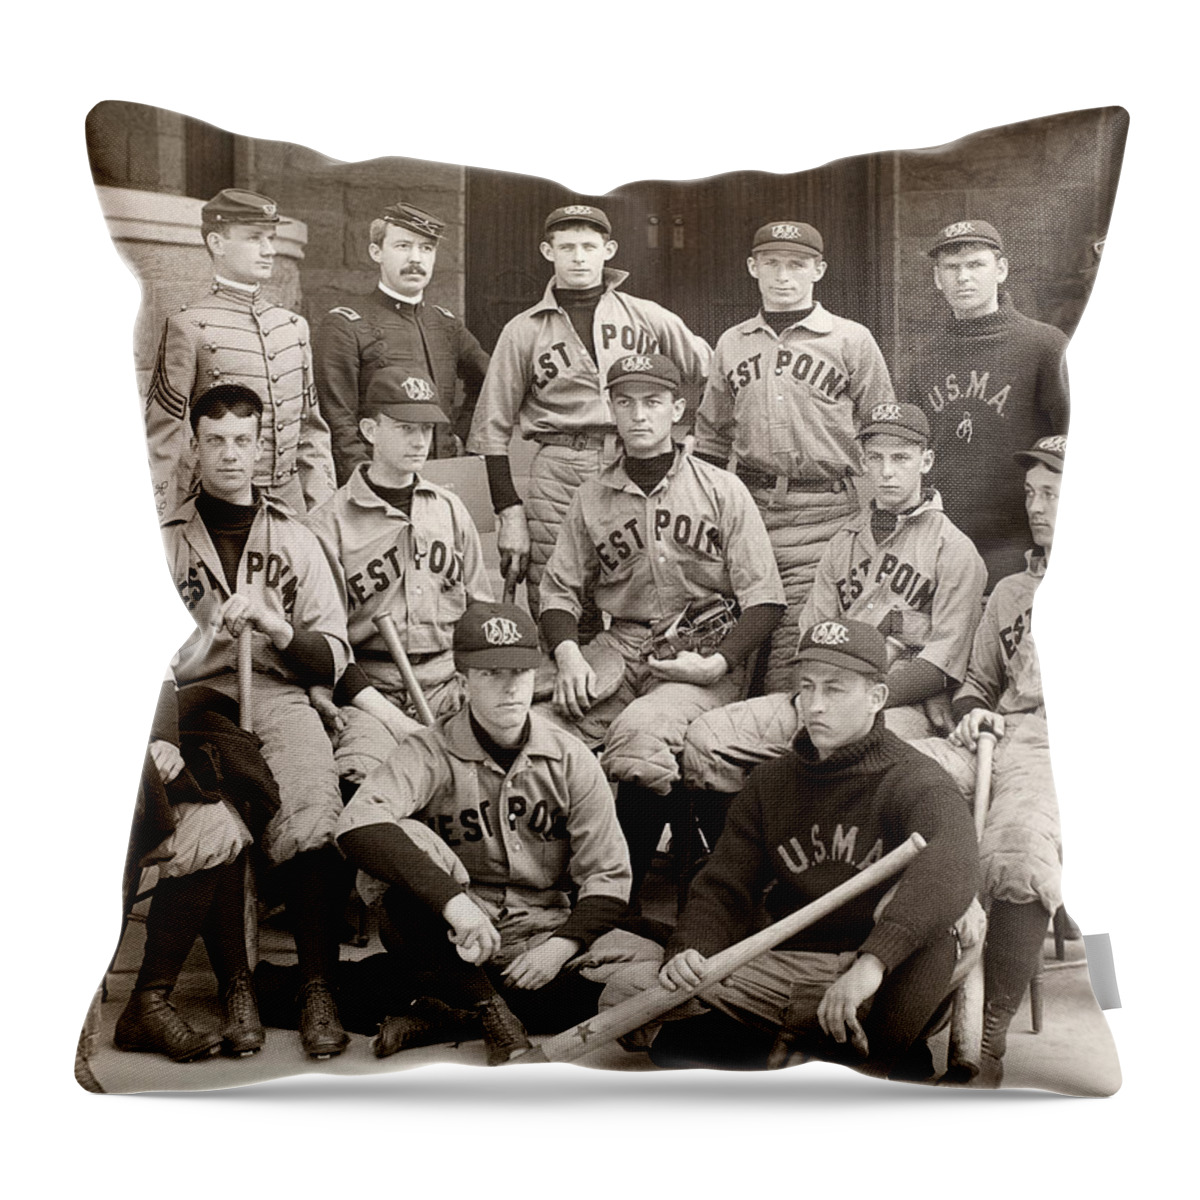 1896 Throw Pillow featuring the photograph Baseball: West Point, 1896 by Granger